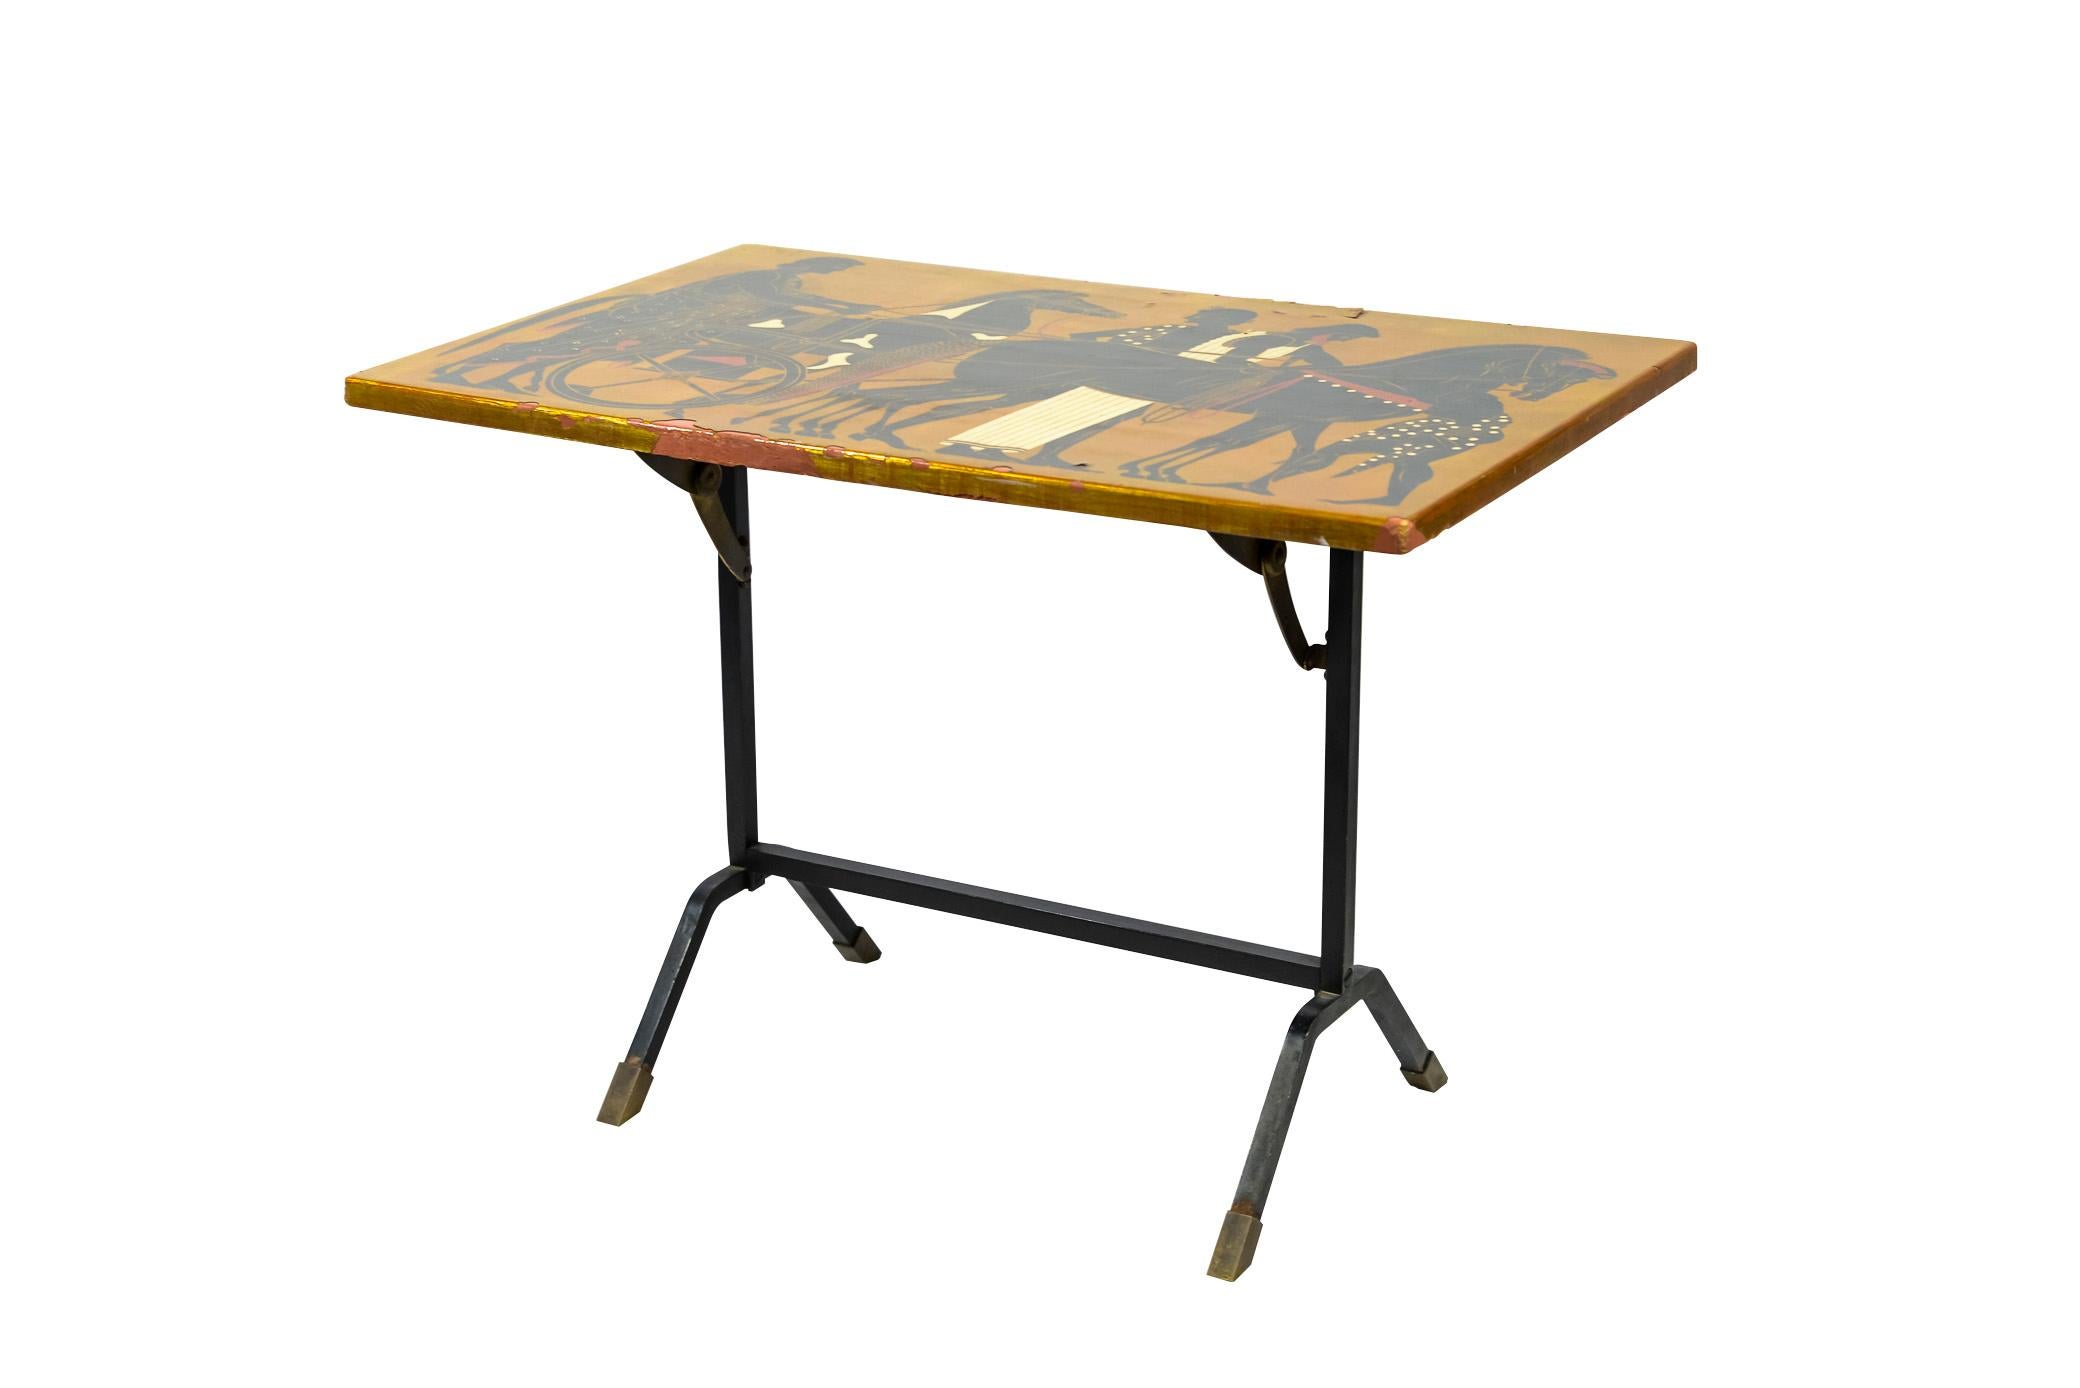 Coffee Table with removable iron top,
The lacquer tray decorated with a Greek scene, 
circa 1980.
Measures: Width 62 cm, Depth 38 cm, Height 43 cm.